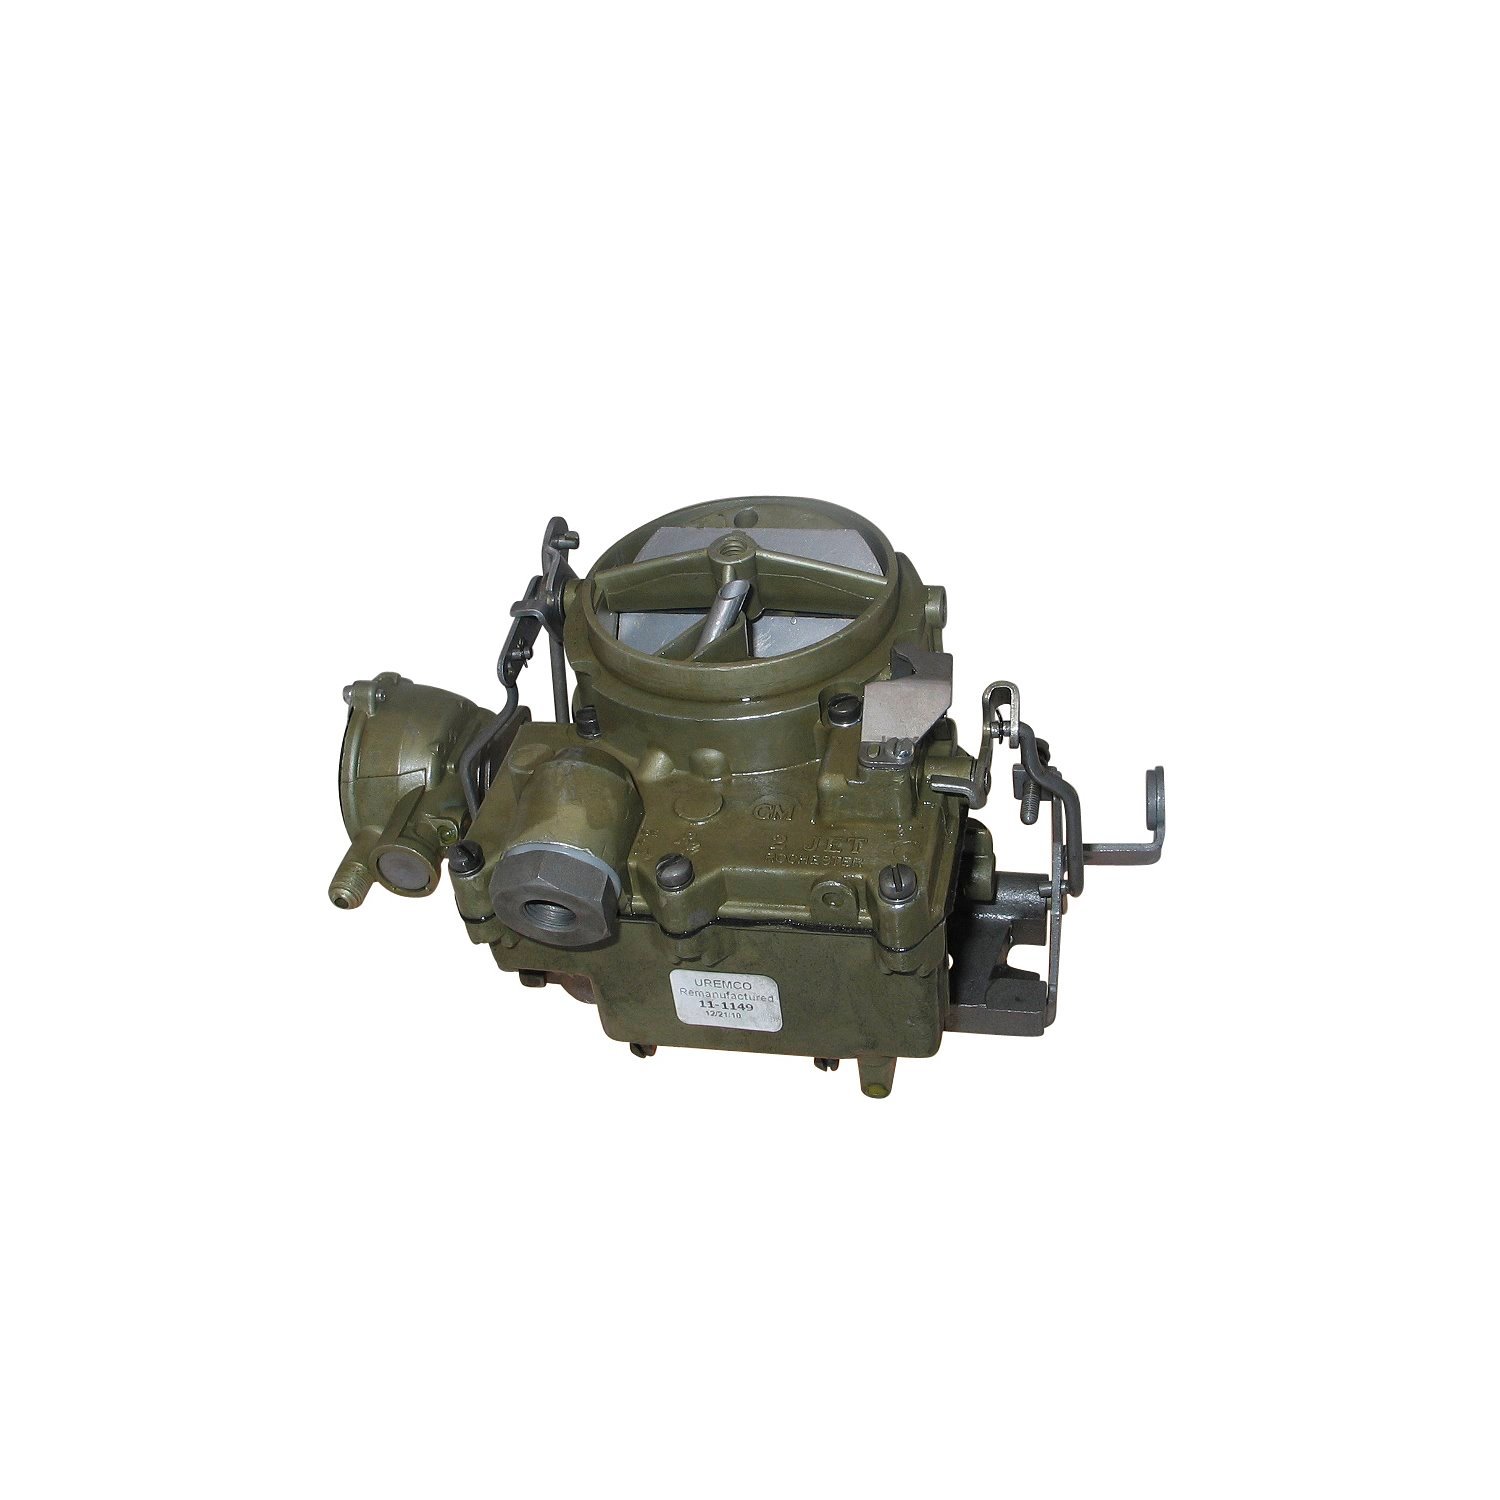 11-1138 Rochester Remanufactured Carburetor, 2GC-Style